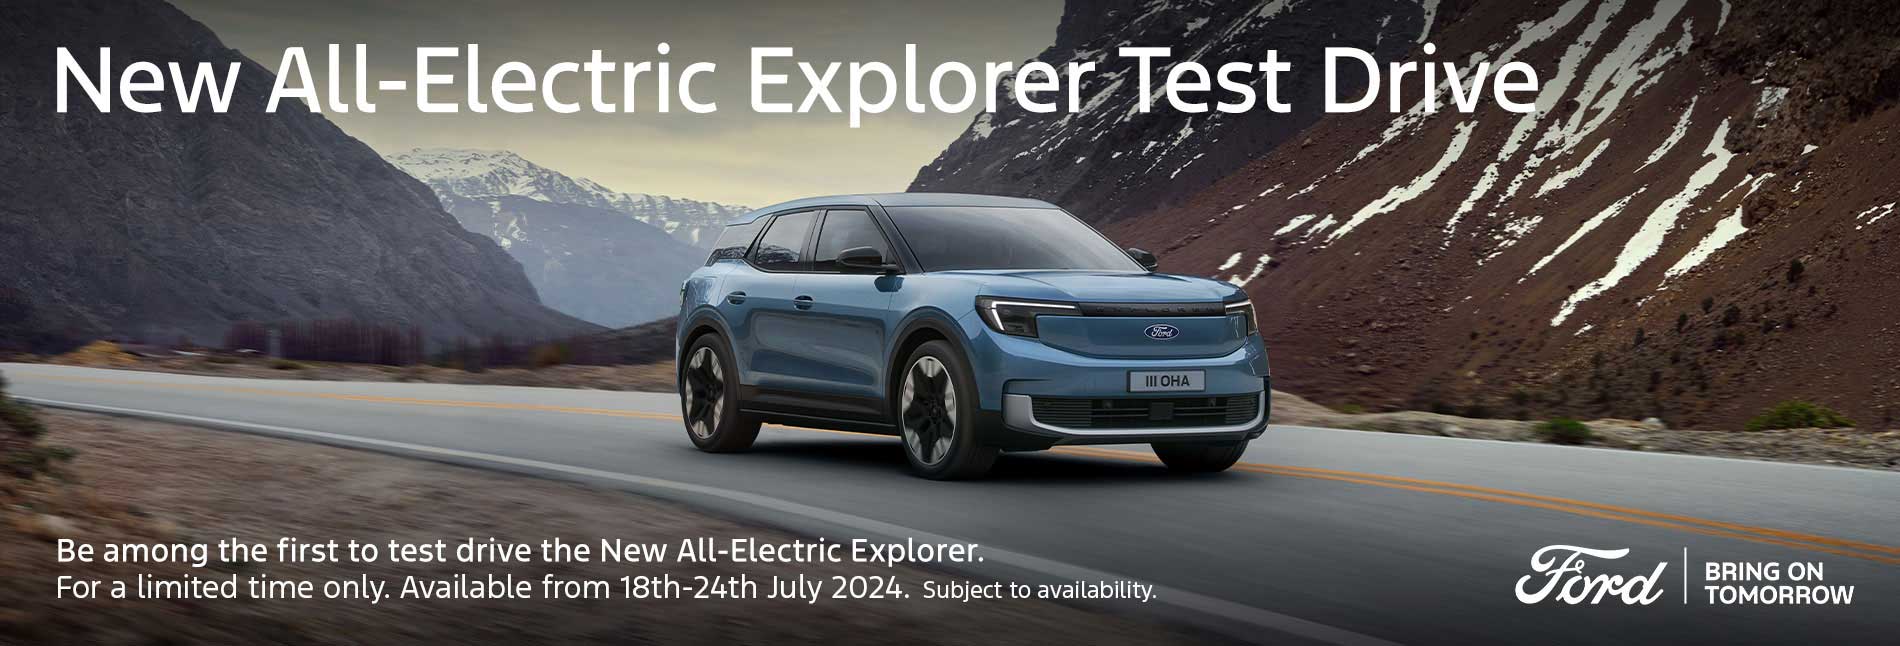 New All-Electric Explorer Test Drive Experience